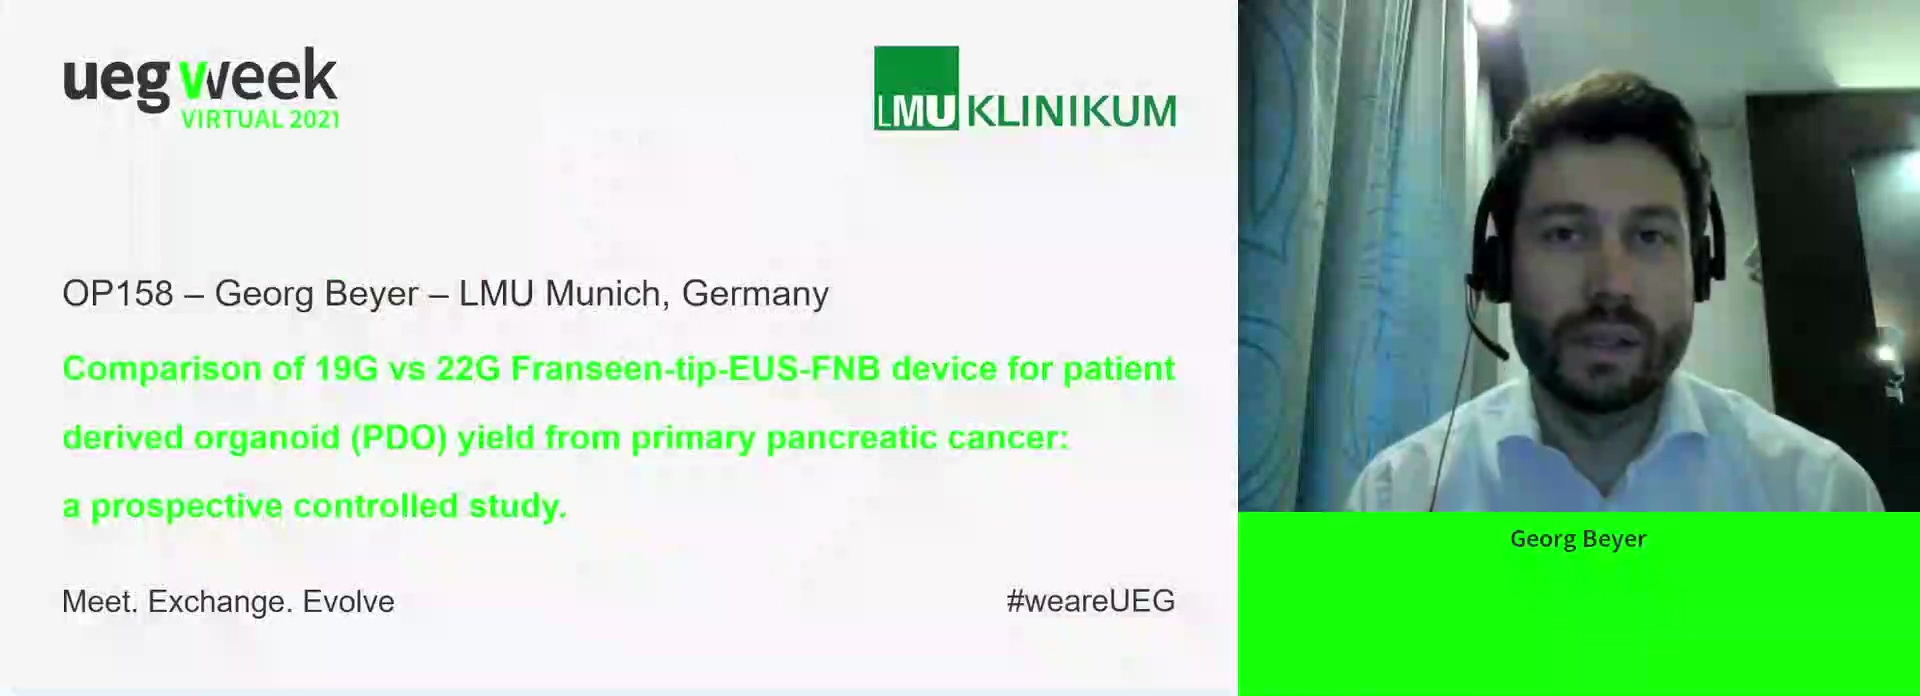 COMPARISON OF 19G VS 22G FRANSEEN-TIP-EUS-FNB DEVICE FOR PATIENT DERIVED ORGANOID (PDO) YIELD FROM PRIMARY PANCREATIC CANCER: A PROSPECTIVE CONTROLLED STUDY